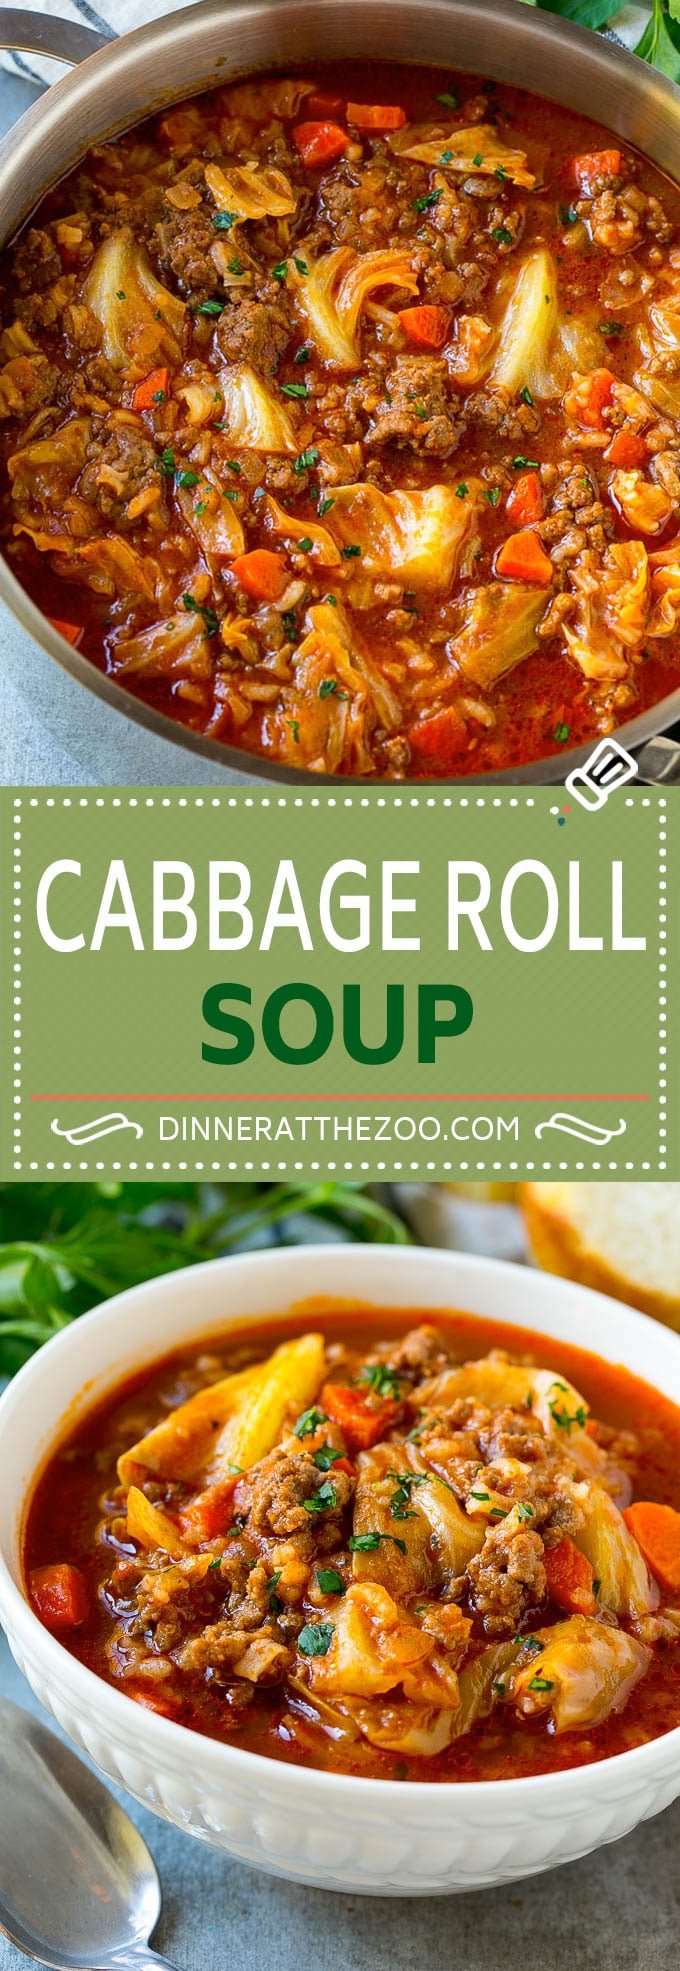 Cabbage Roll Soup Recipe | Unstuffed Cabbage Soup | Cabbage Soup Recipe | Beef and Cabbage Soup #cabbage #soup #cabbagesoup #beef #dinneratthezoo